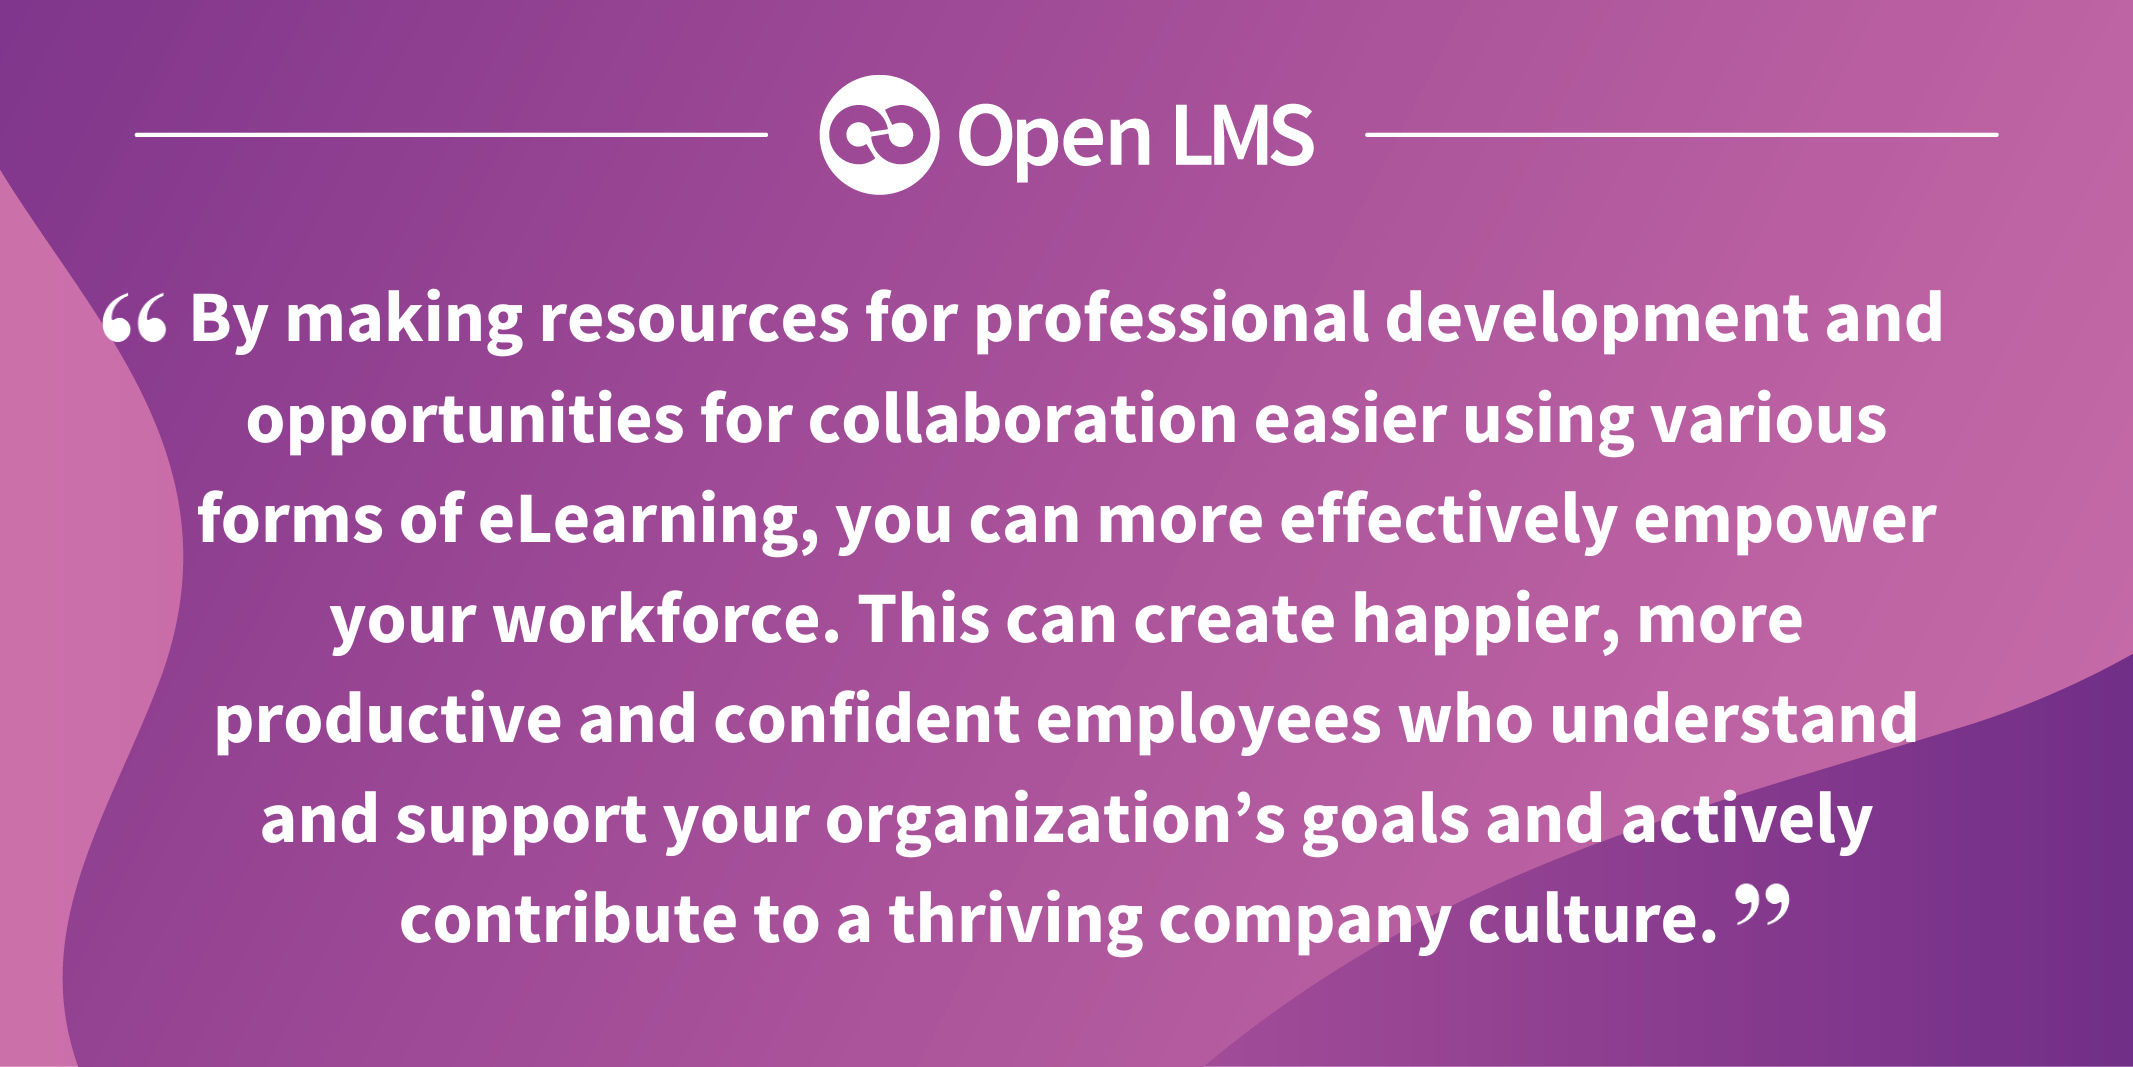 By making resources for professional development and opportunities for collaboration easier using various forms of eLearning, you can more effectively empower your workforce. This can create happier, more productive and confident employees who understand and support your organization’s goals and actively contribute to a thriving company culture. 